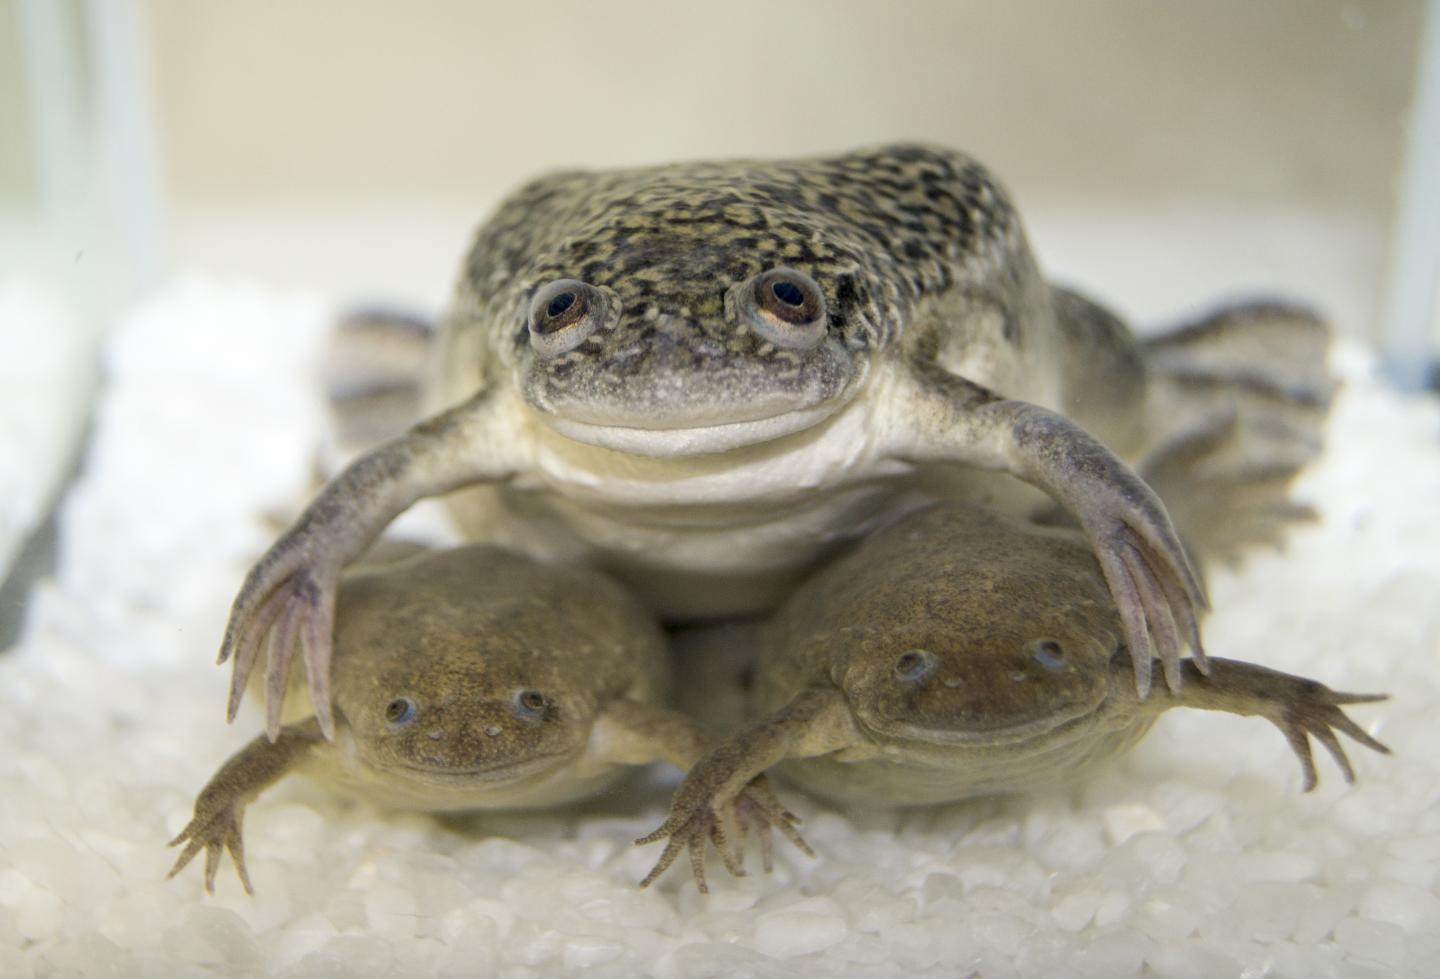 The African Clawed Frog <i>X. laevis</i> and the Western Clawed Frog <i>X. tropicalis</i>